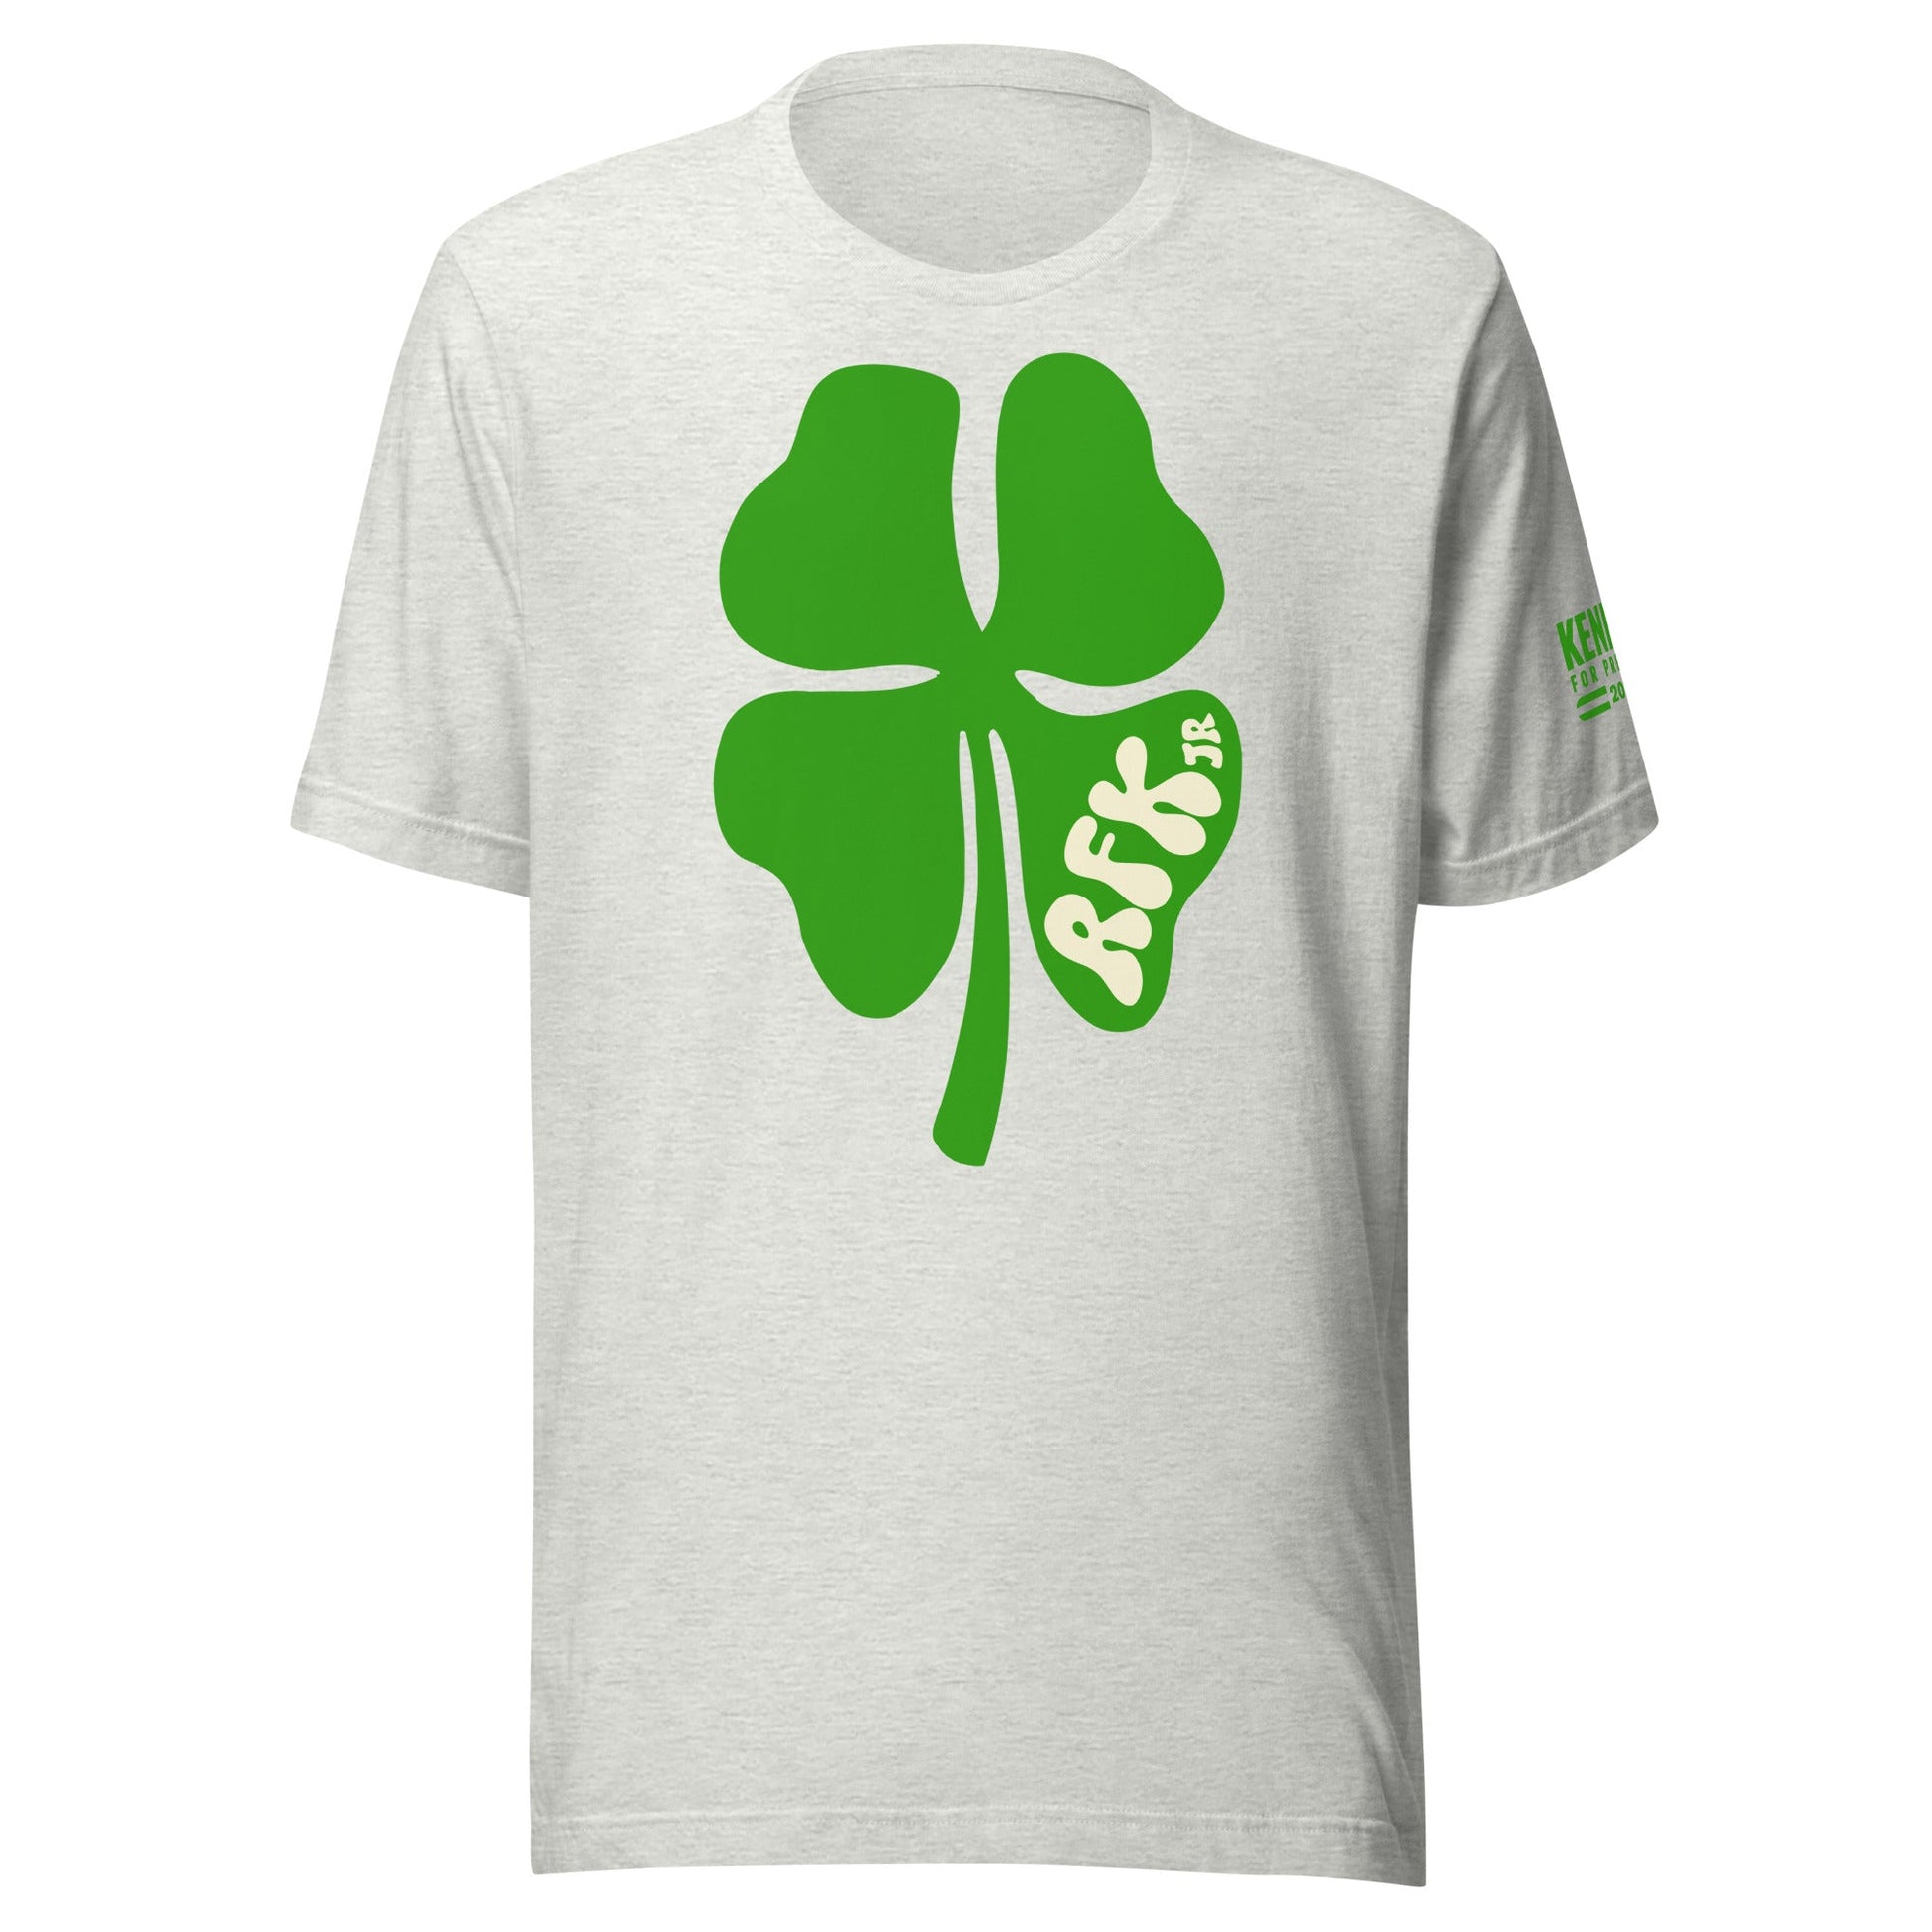 RFK Jr. Clover Unisex Tee - TEAM KENNEDY. All rights reserved